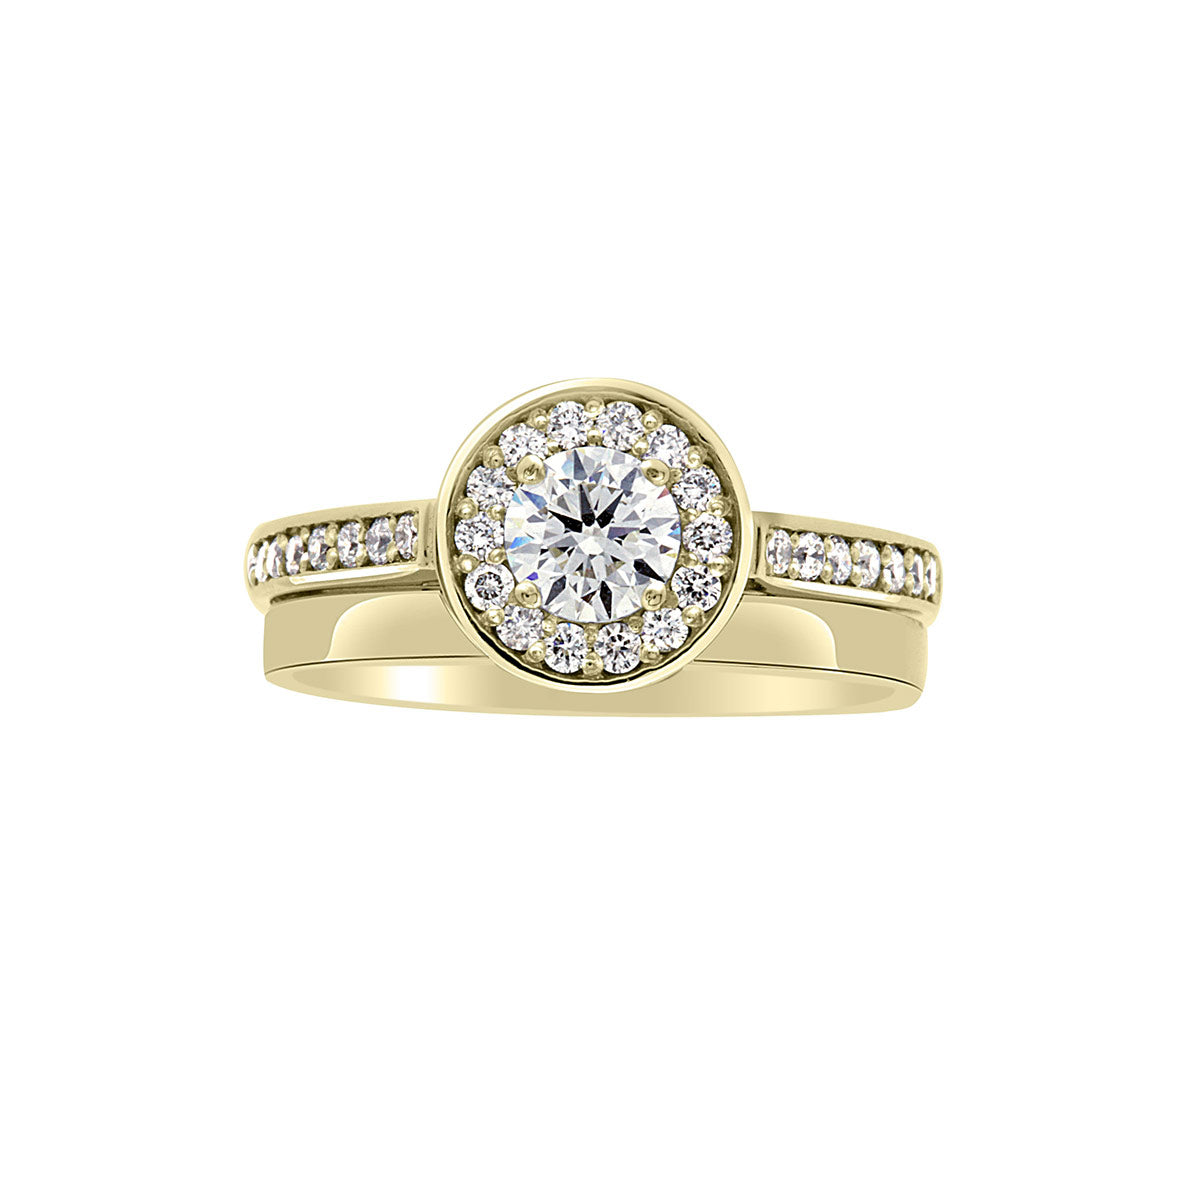 Round Halo Engagement Ring in yellow gold with a plain wedding ring